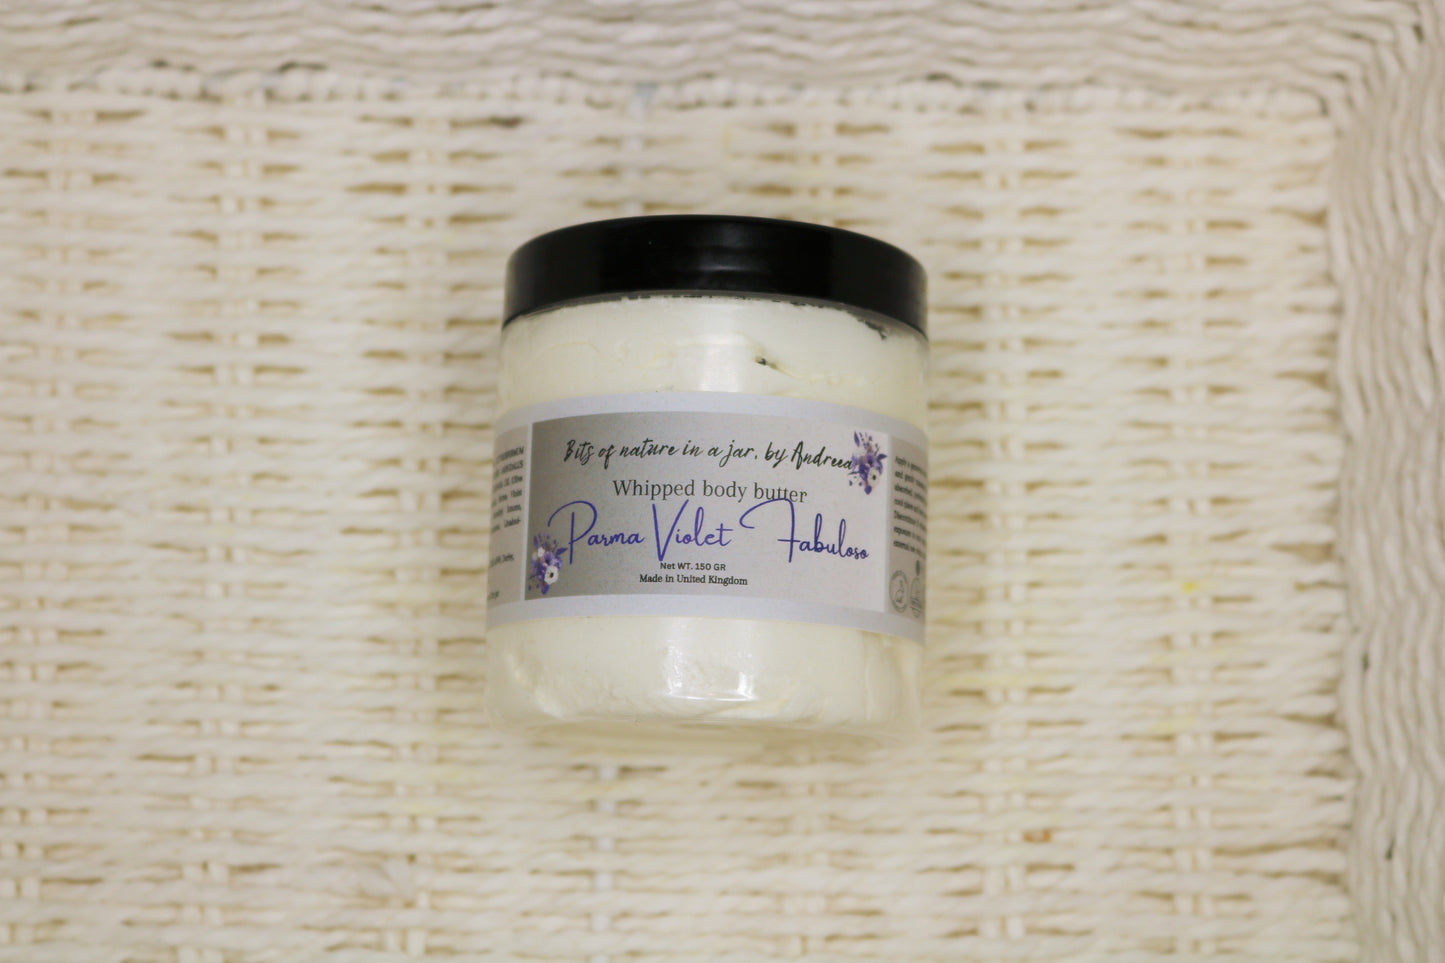 Parma Violet Fabuloso Body Butter